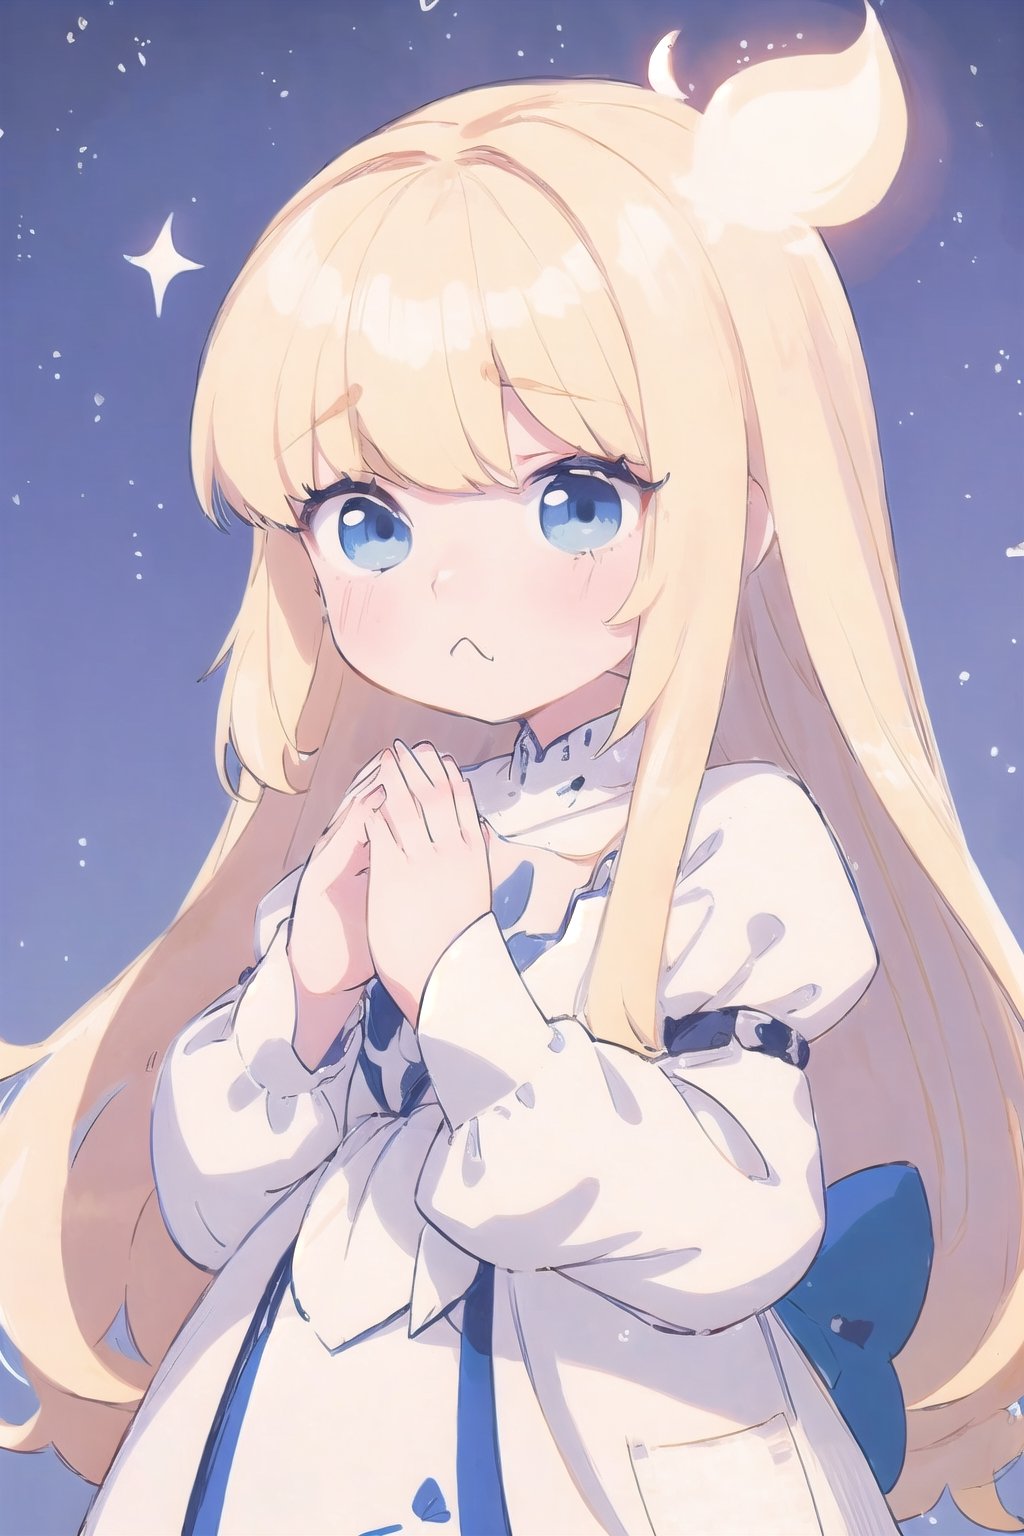 (cute illustration:1.4),(fuwafuwa illustration:1.3),masterpiece, 1girl, blonde hair,（Holding glowing stars in both hands：1.6）,better_hands, calca, extremely long hair, white dress, blue_eyes, long_sleeves, cute, child, adorable